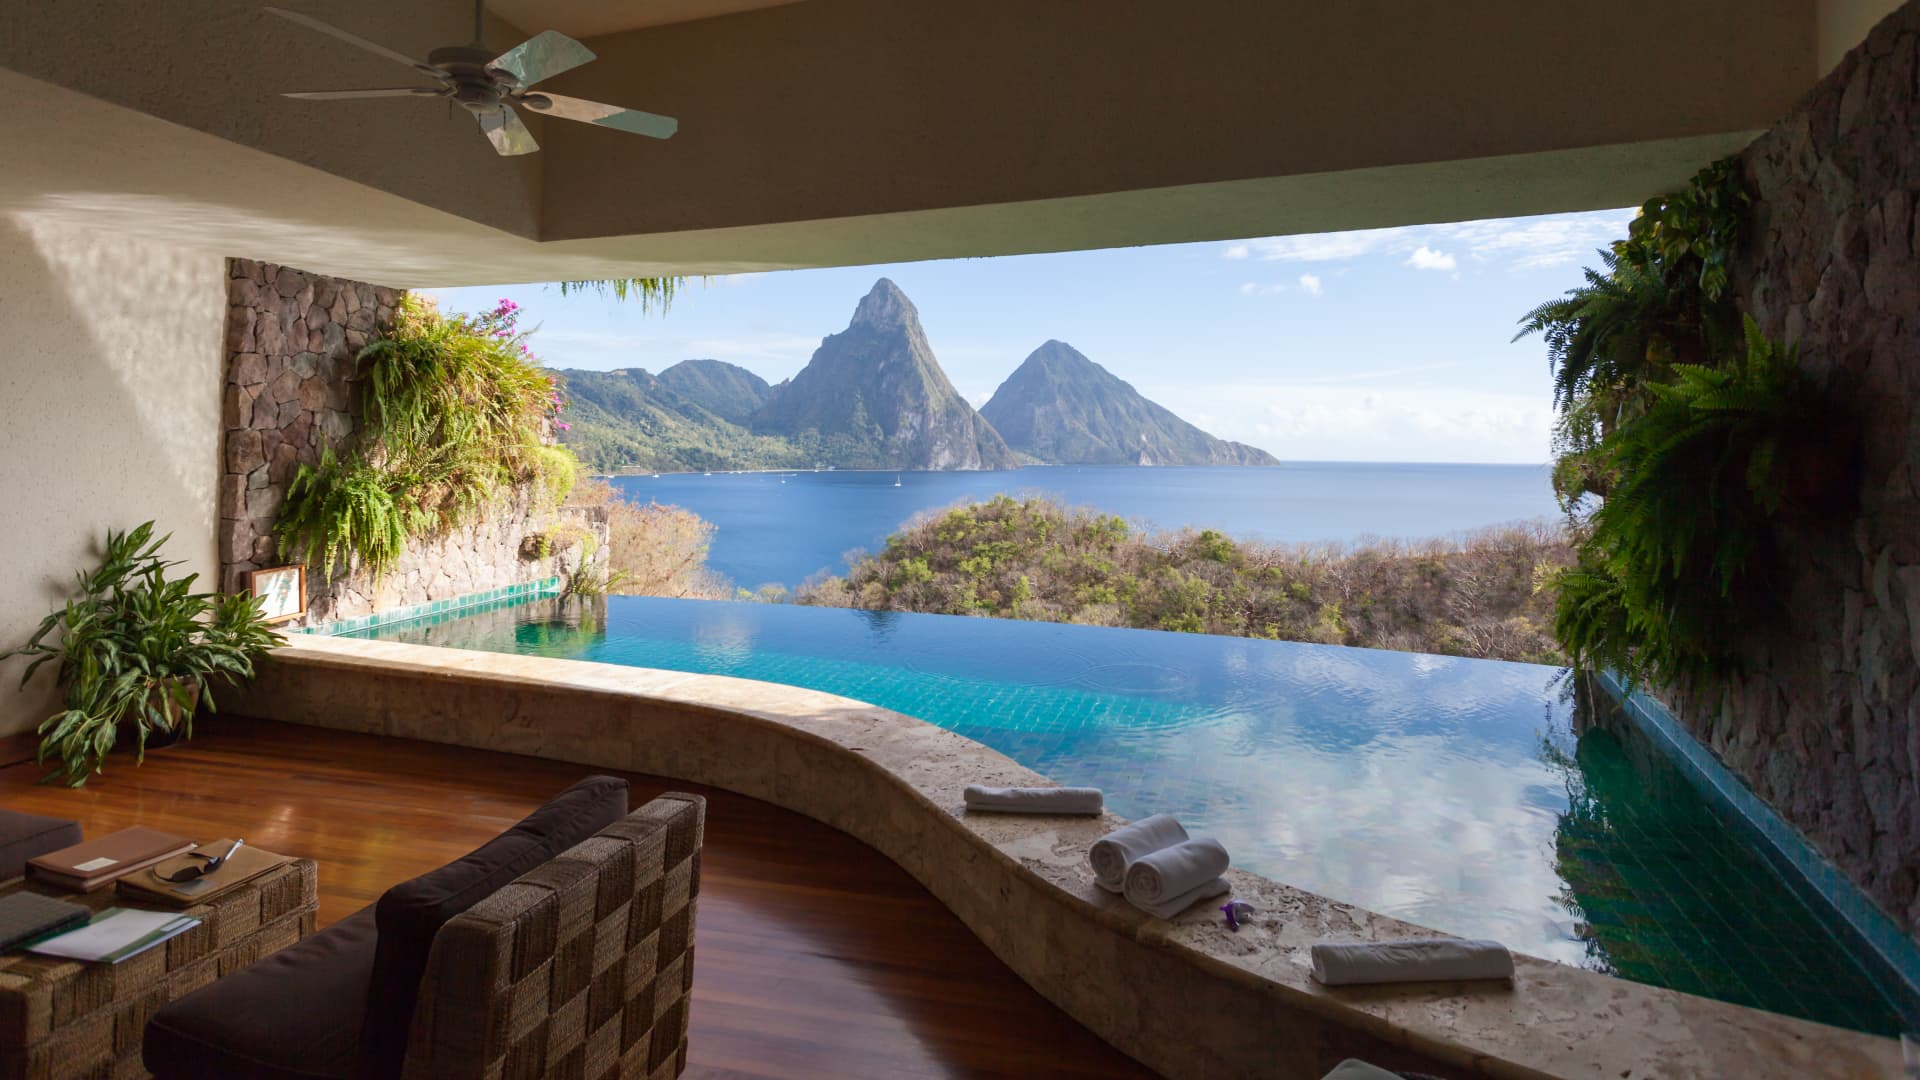 A view of St. Lucia's Pitons mountains from the Jade Mountain Resort, which was ranked the third best hotel in the Caribbean in 2023 by the U.S. News & World Report.